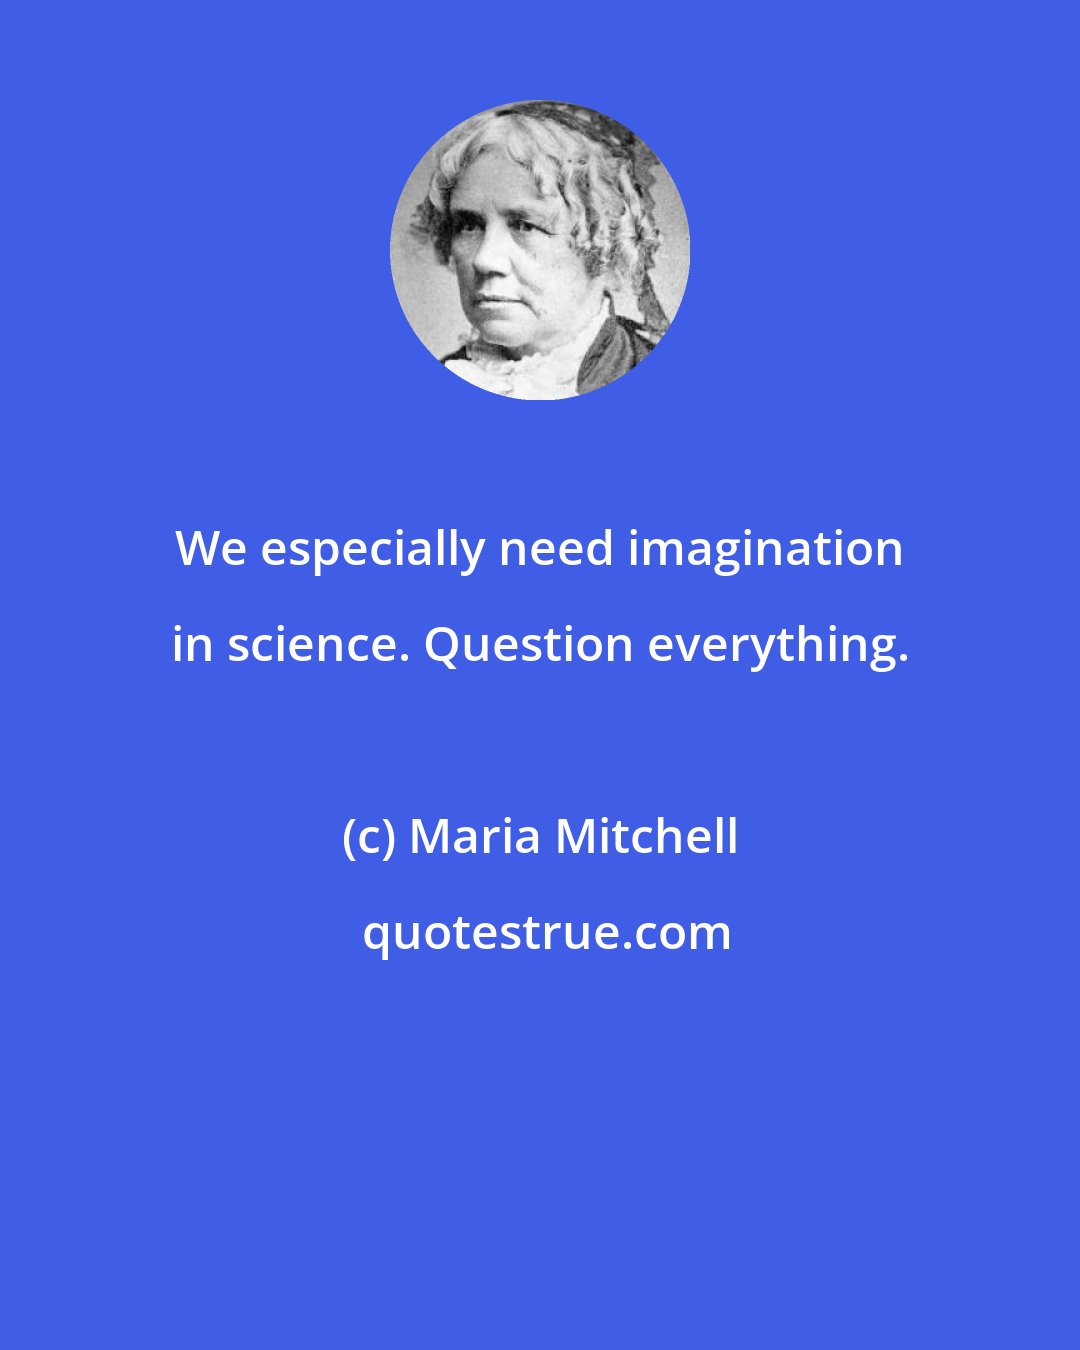 Maria Mitchell: We especially need imagination in science. Question everything.